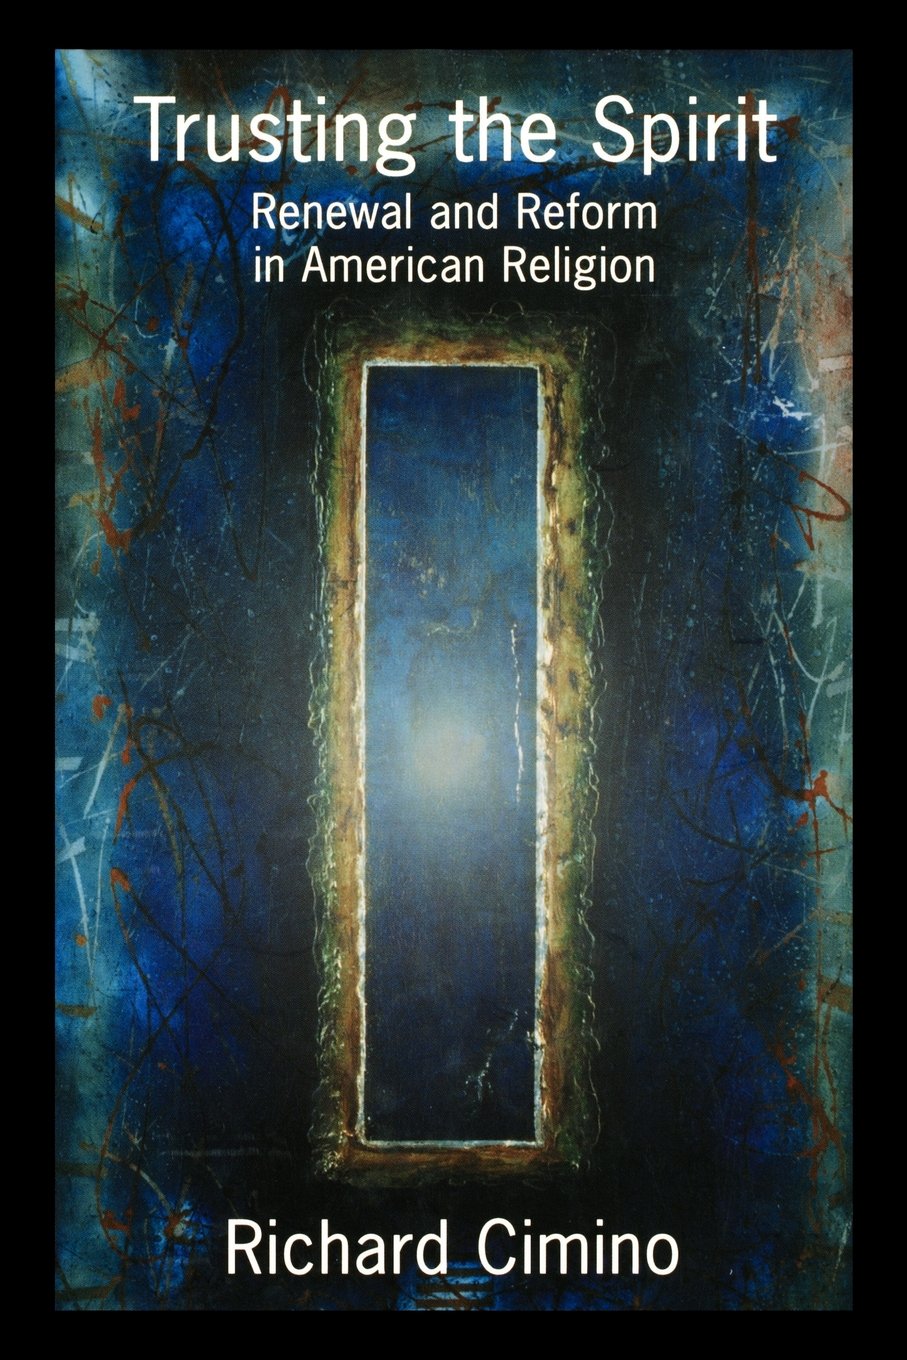 Trusting the Spirit: Renewal and Reform in American Religion